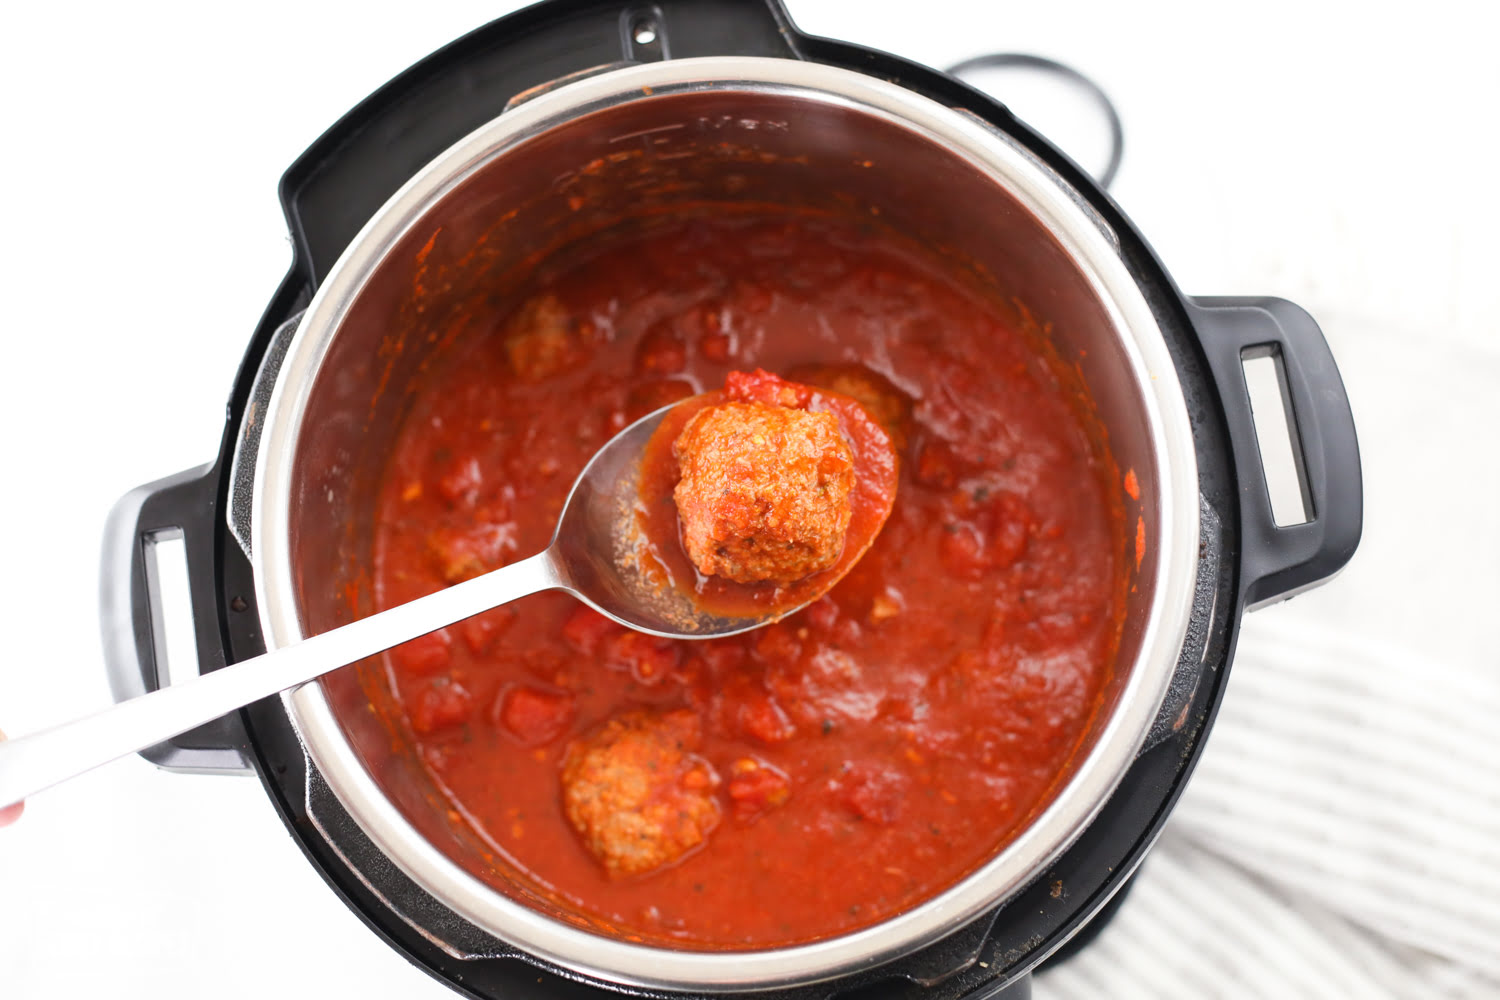 How Long Do You Cook Meatballs In An Electric Pressure Cooker